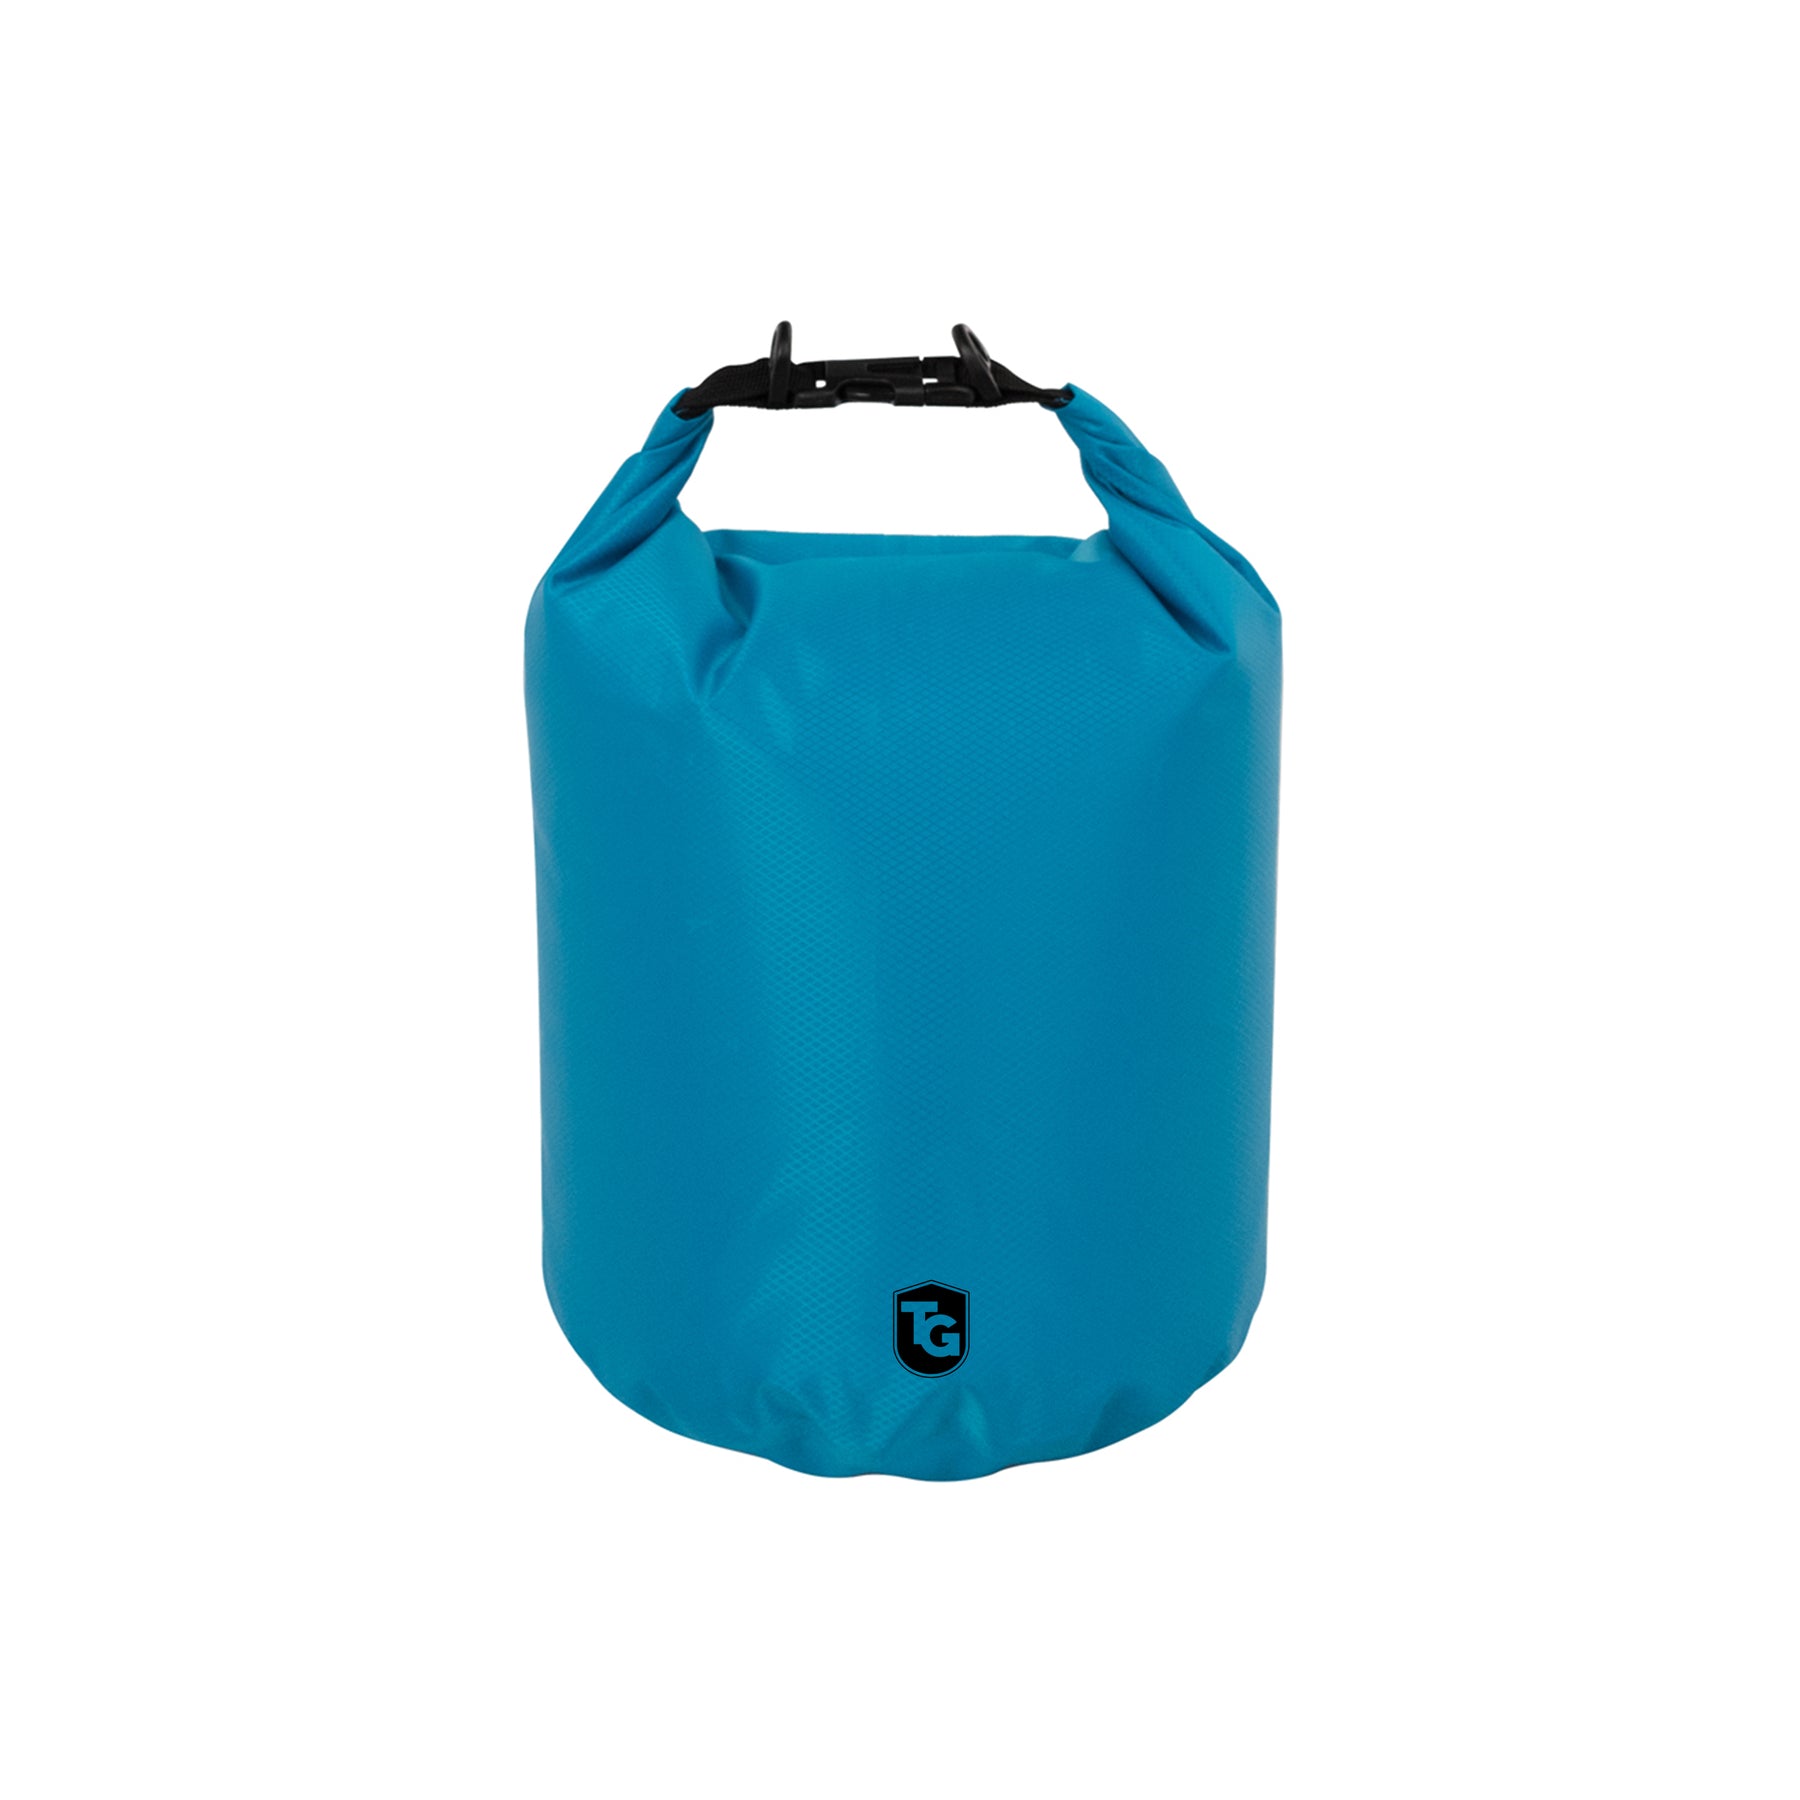 TrailGear 5 liter Heavy-Duty Dry Bag in the sky blue variation.